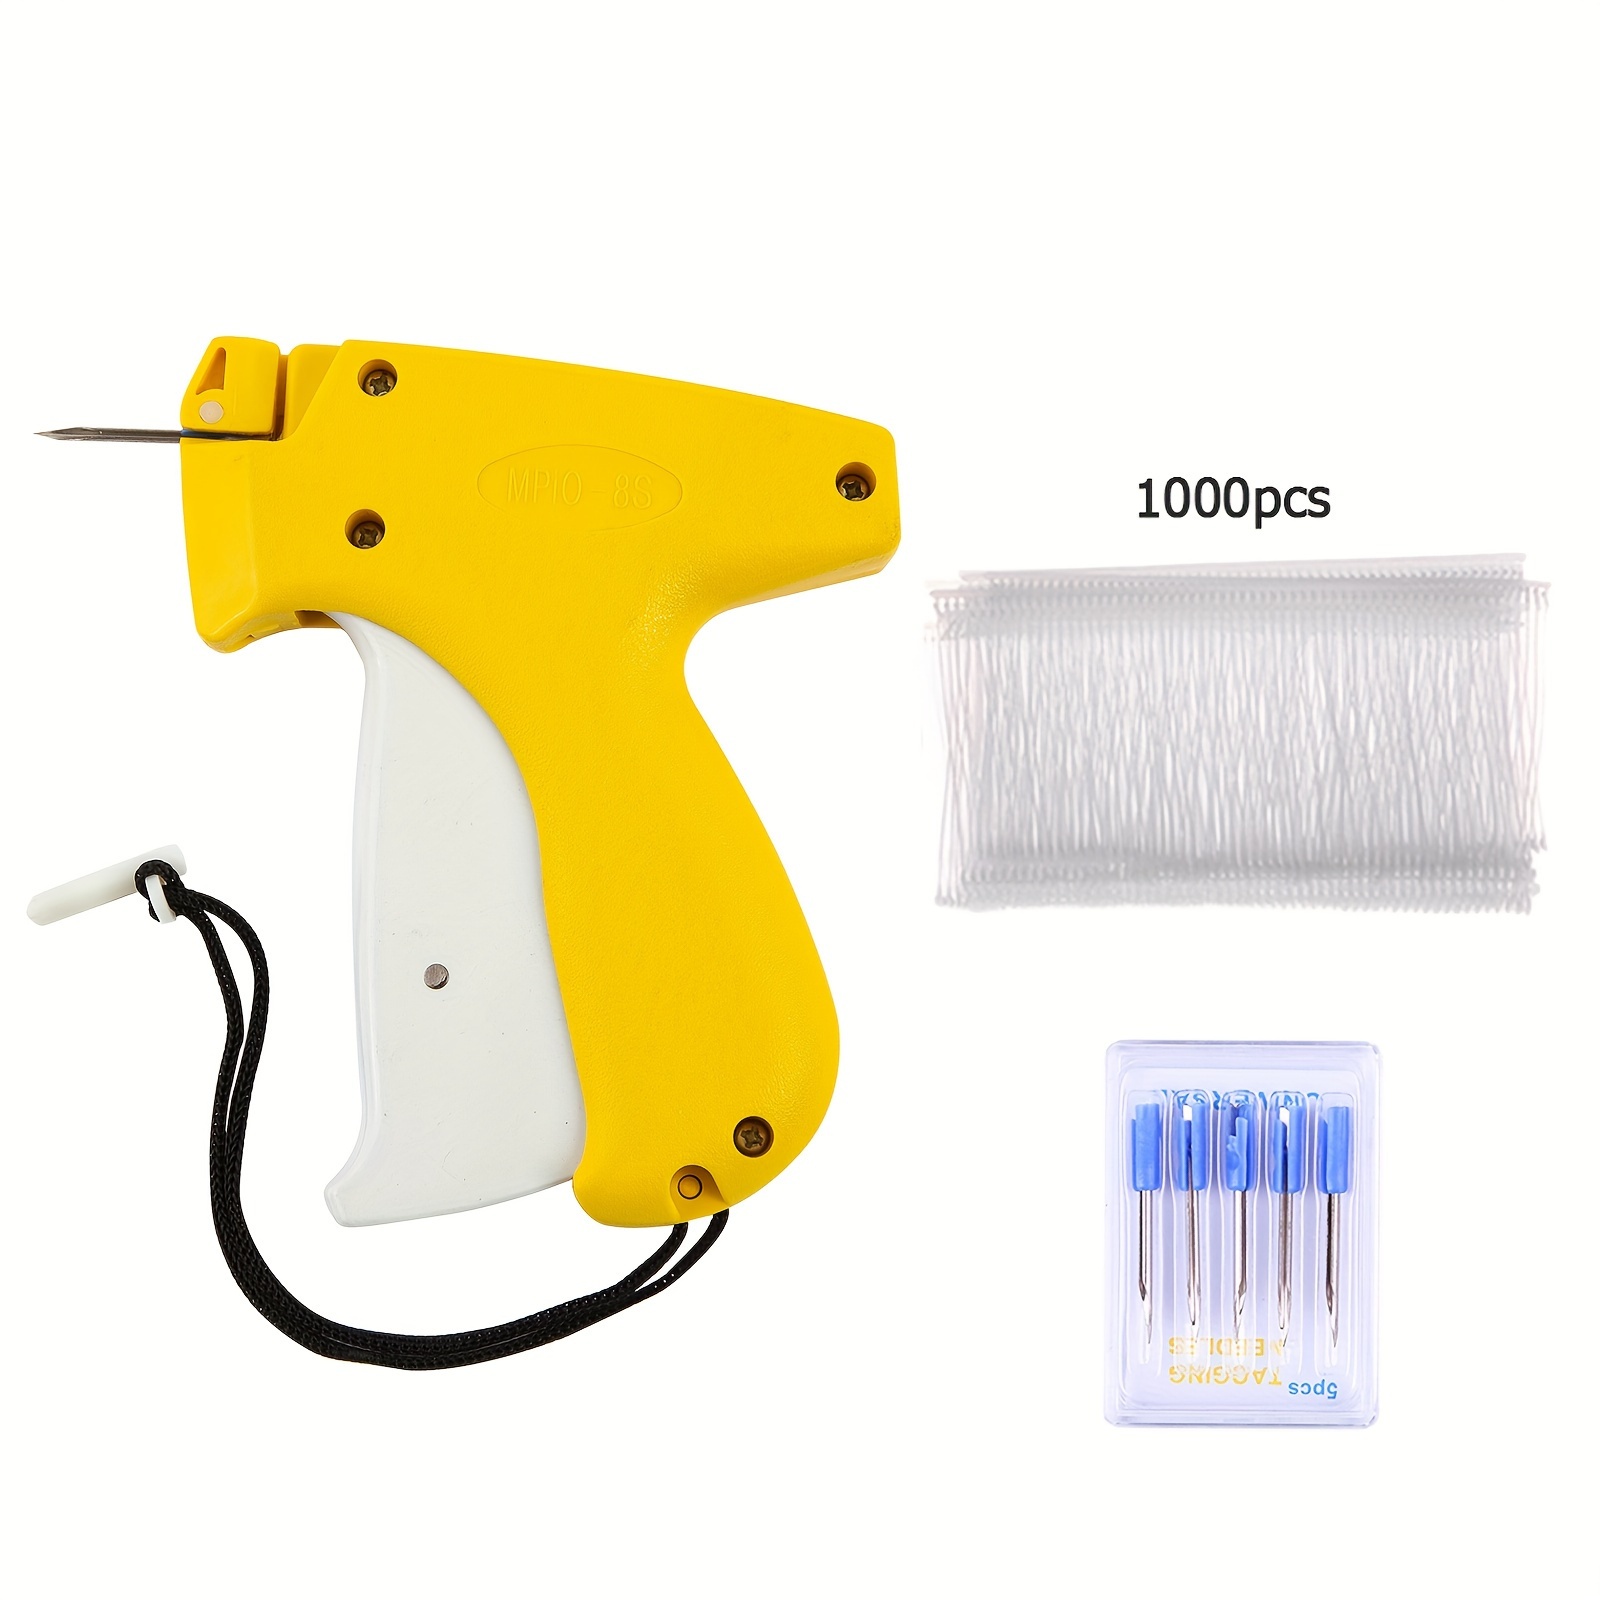 

1pc Yellow Tagging Gun For Clothing, Standard Retail Price Tag Gun Kit For Clothes Labeler With 6 Needles & 1000pcs 2" Barbs Fasteners & Organizer Bag For Store Warehouse